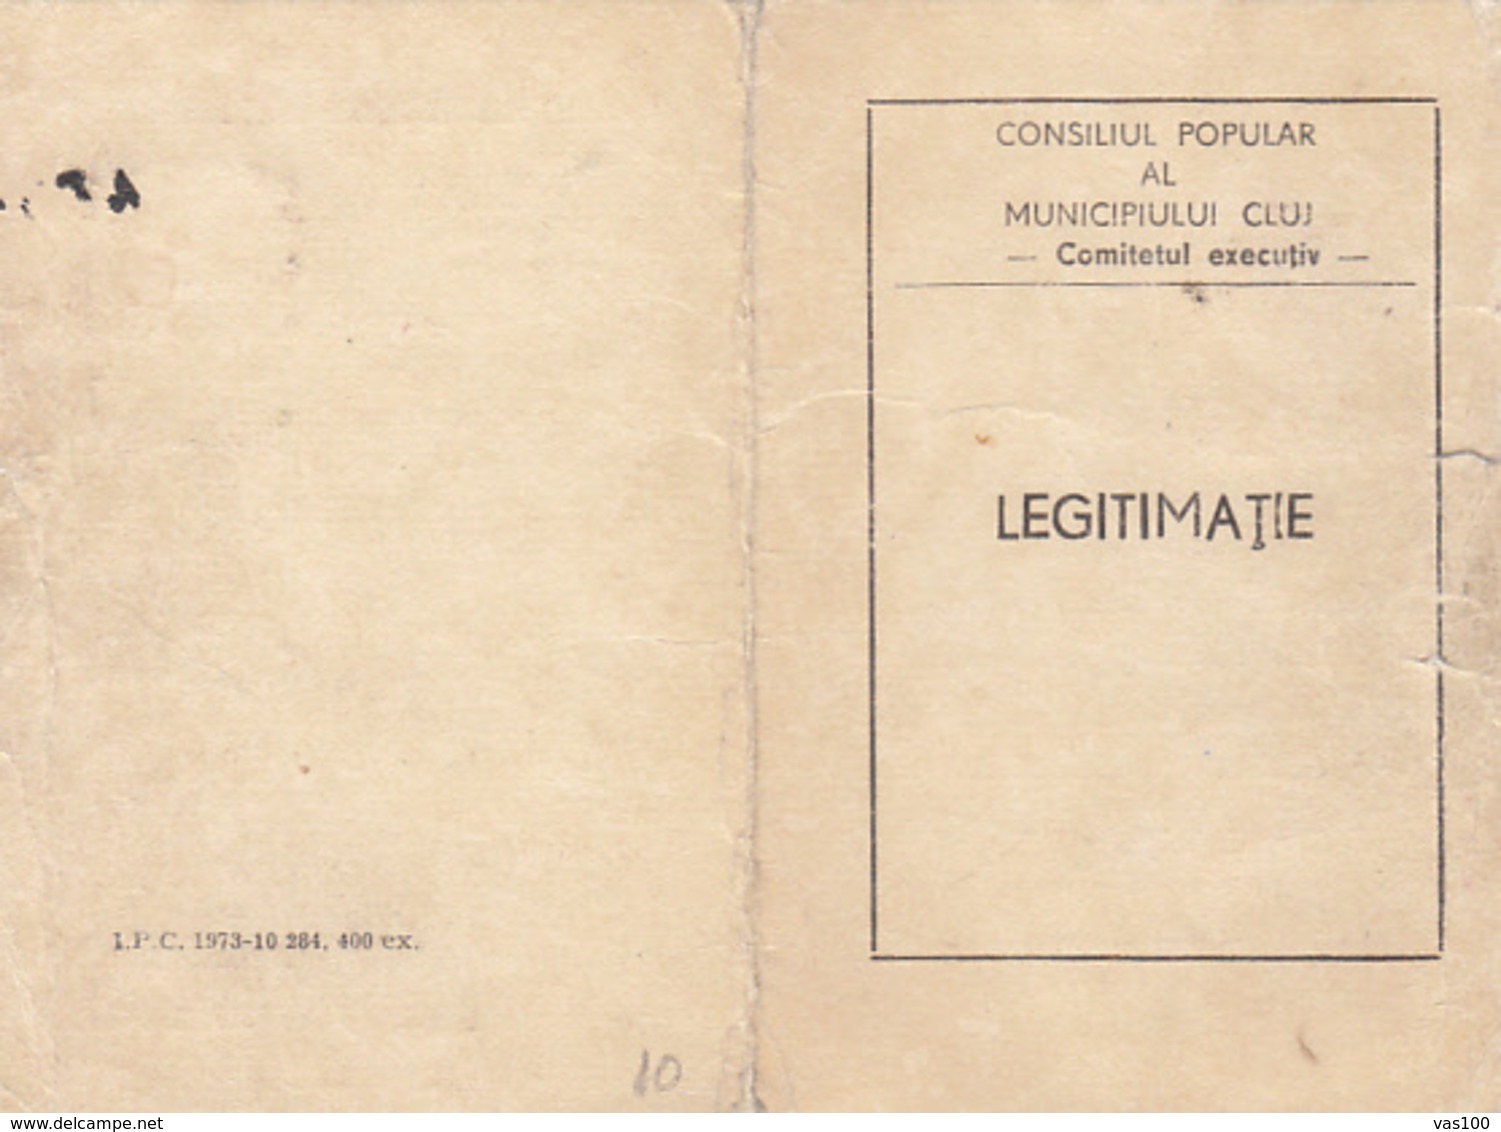 CLUJ NAPOCA LOCAL COUNCIL MEMBER CREDENTIAL, PHOTO ID, 1973, ROMANIA - Historical Documents